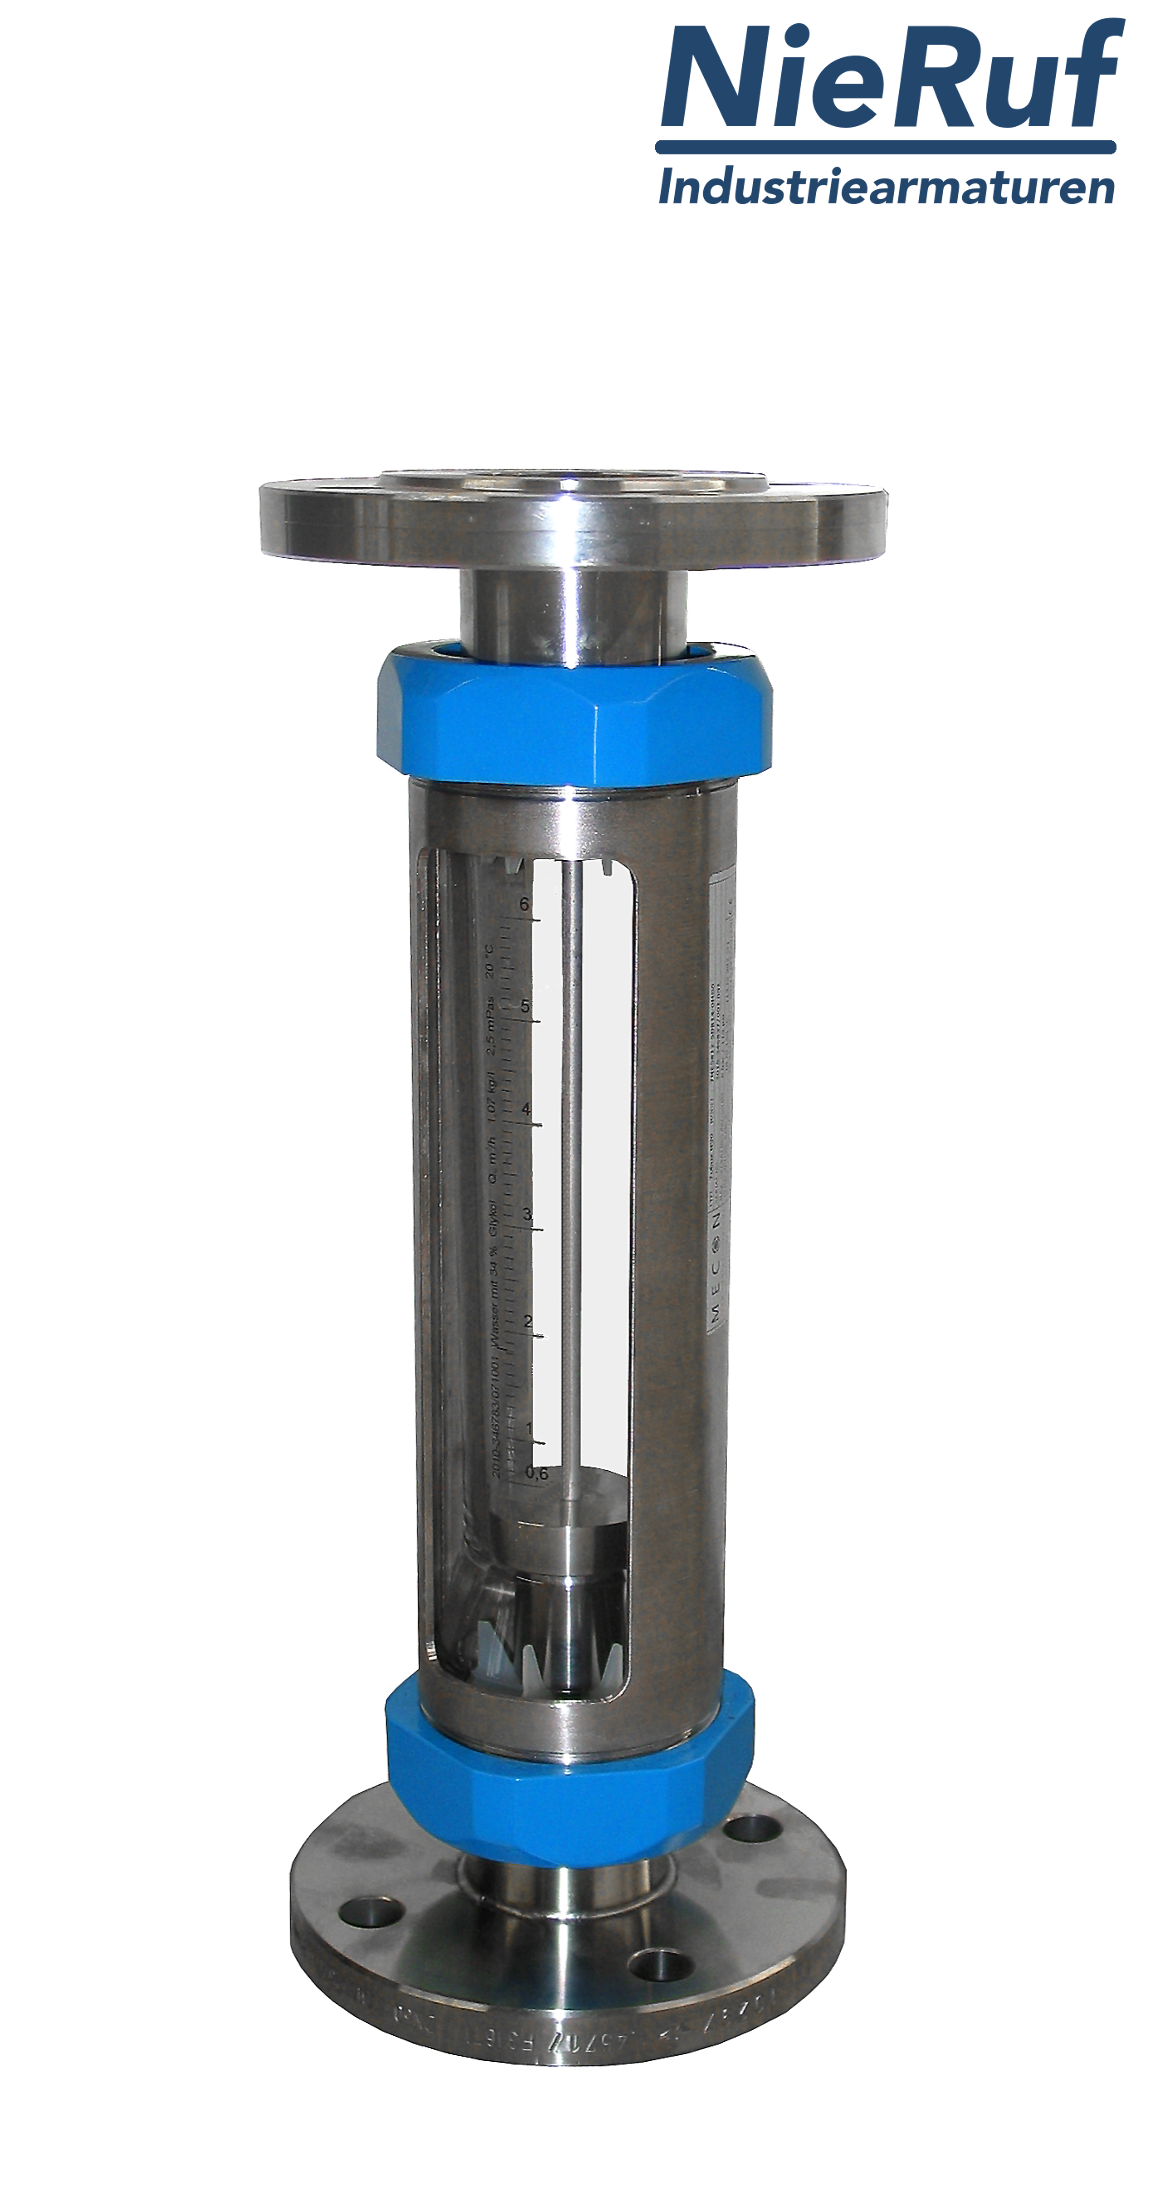 Variable area flowmeter stainless steel + borosilicate flange DN25 1.0 - 10.0 l/h water FKM